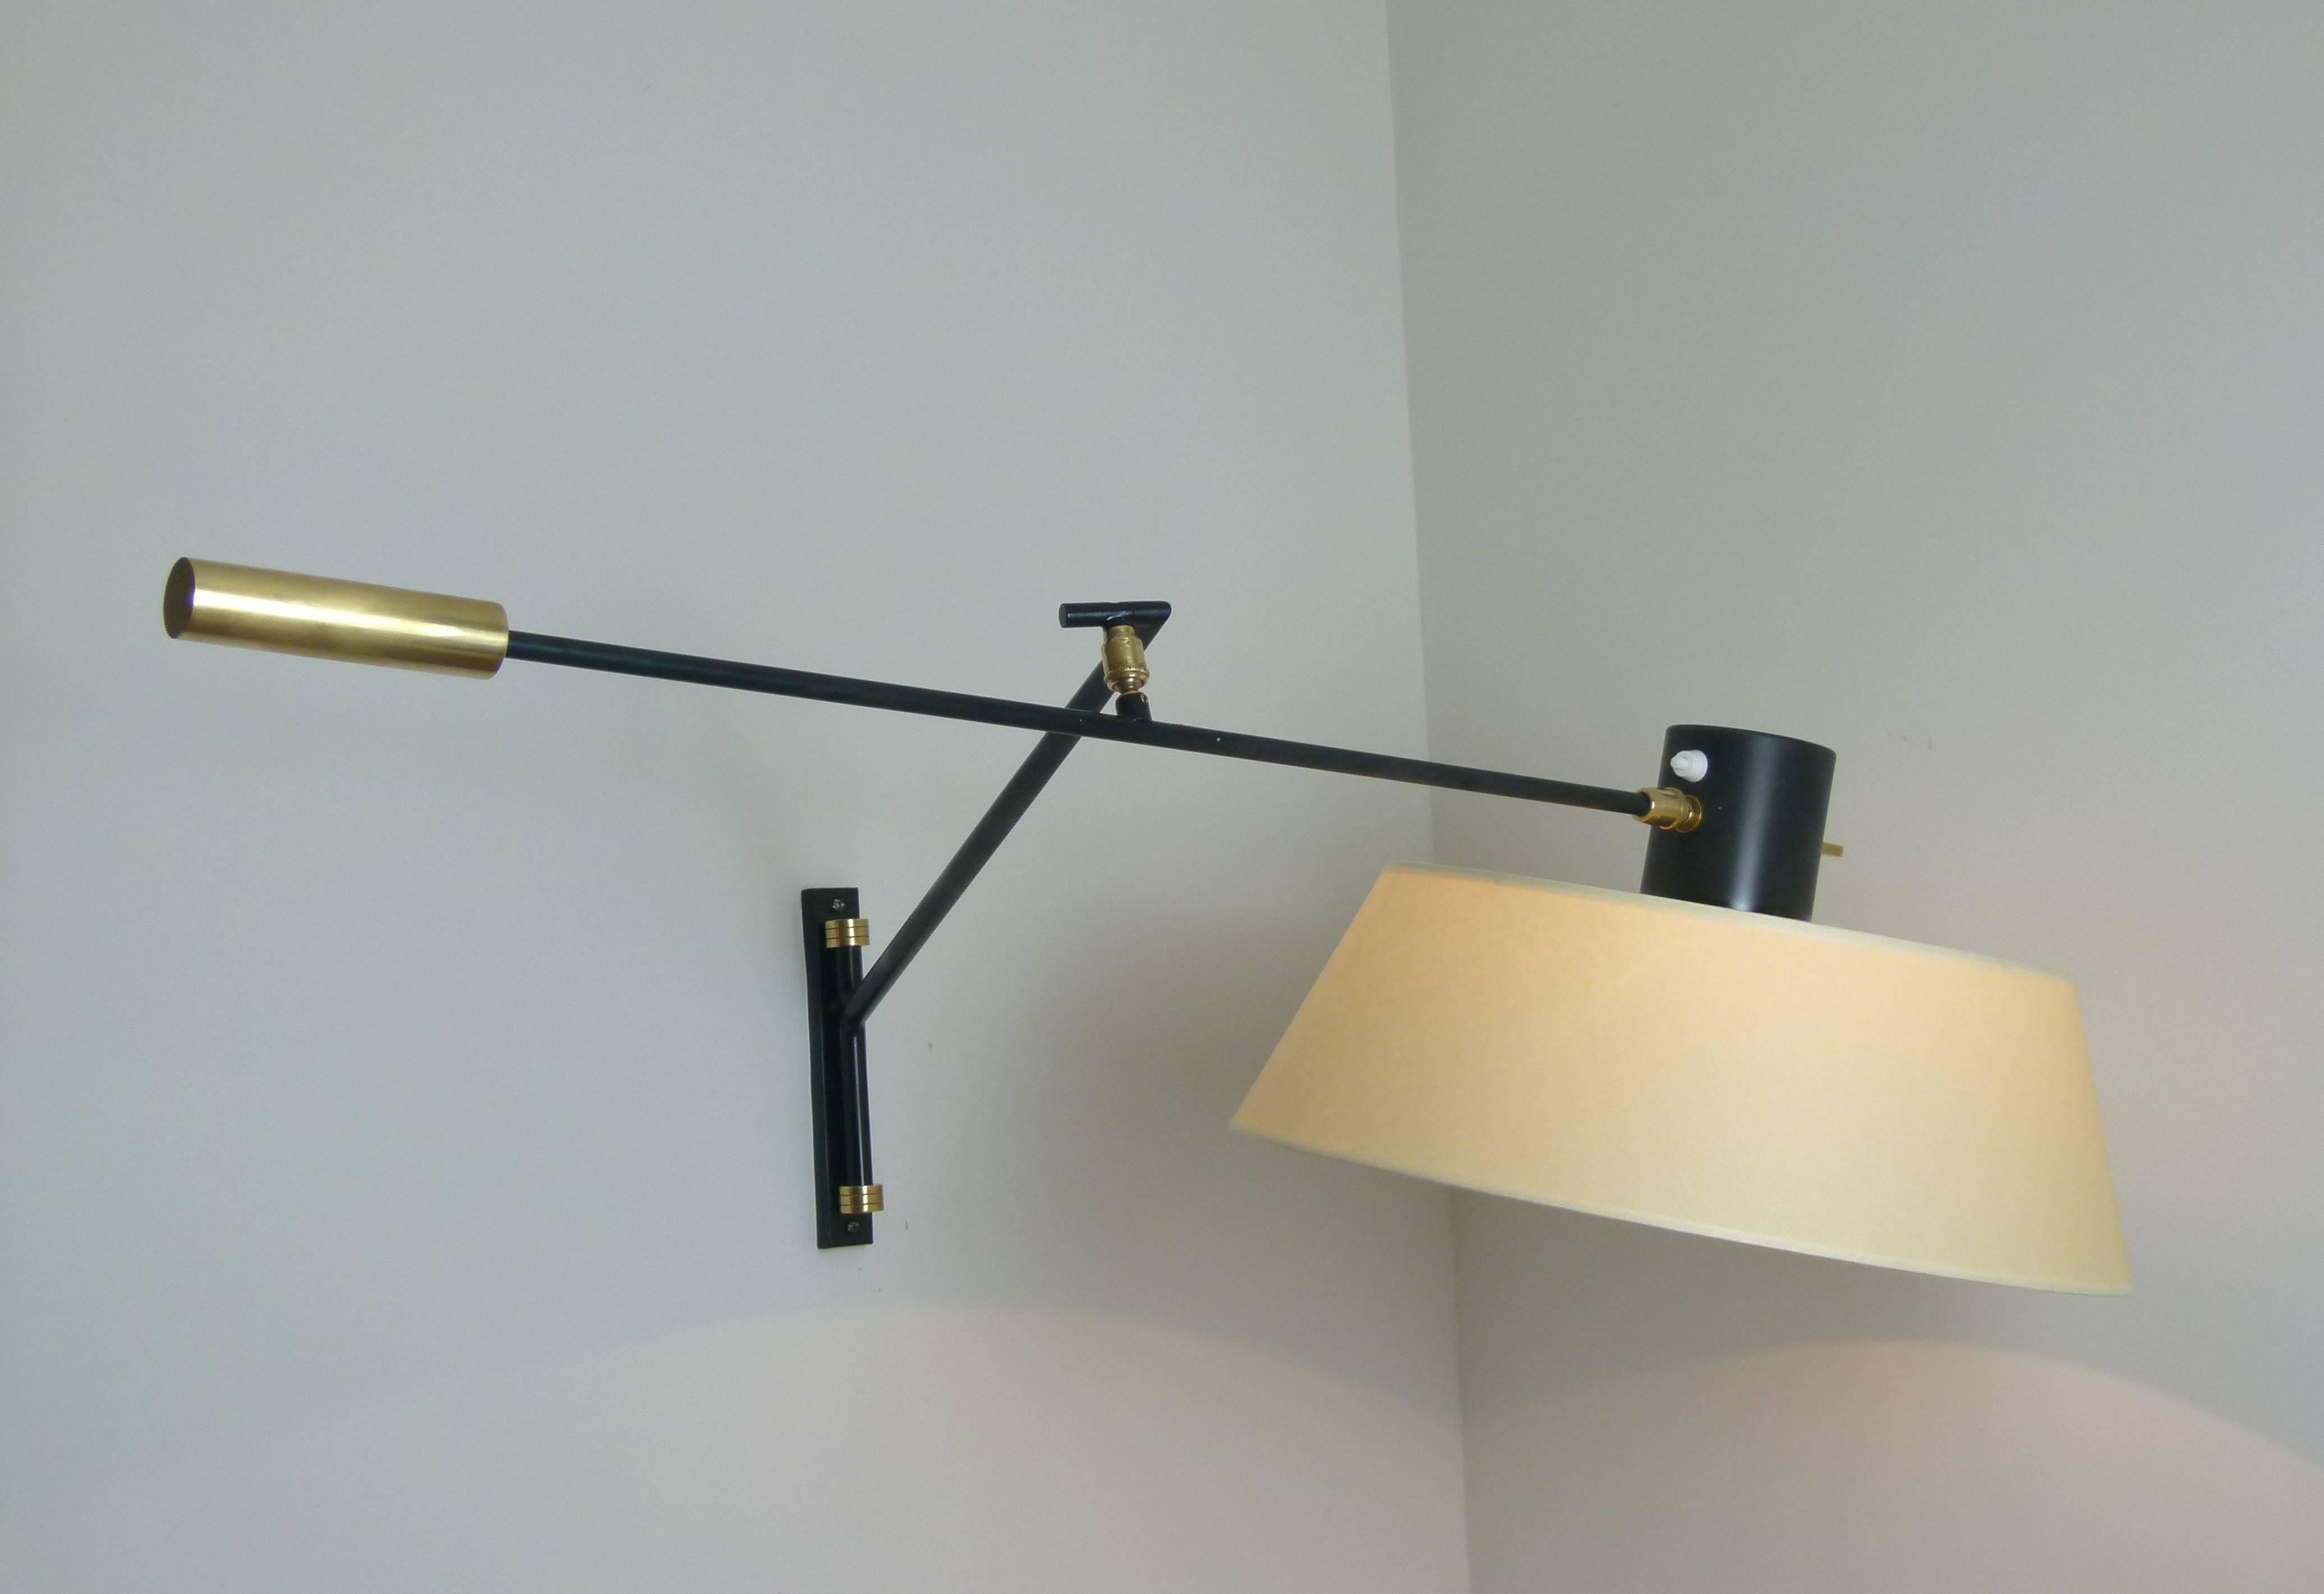 Black lacquered metal and brass sconce consisting of a rectangular base on which is set a swiveling rod linked to black lacquered metal arm linked to another arm by a brass ball that allows orientation.
A solid brass handle is set at the end of the